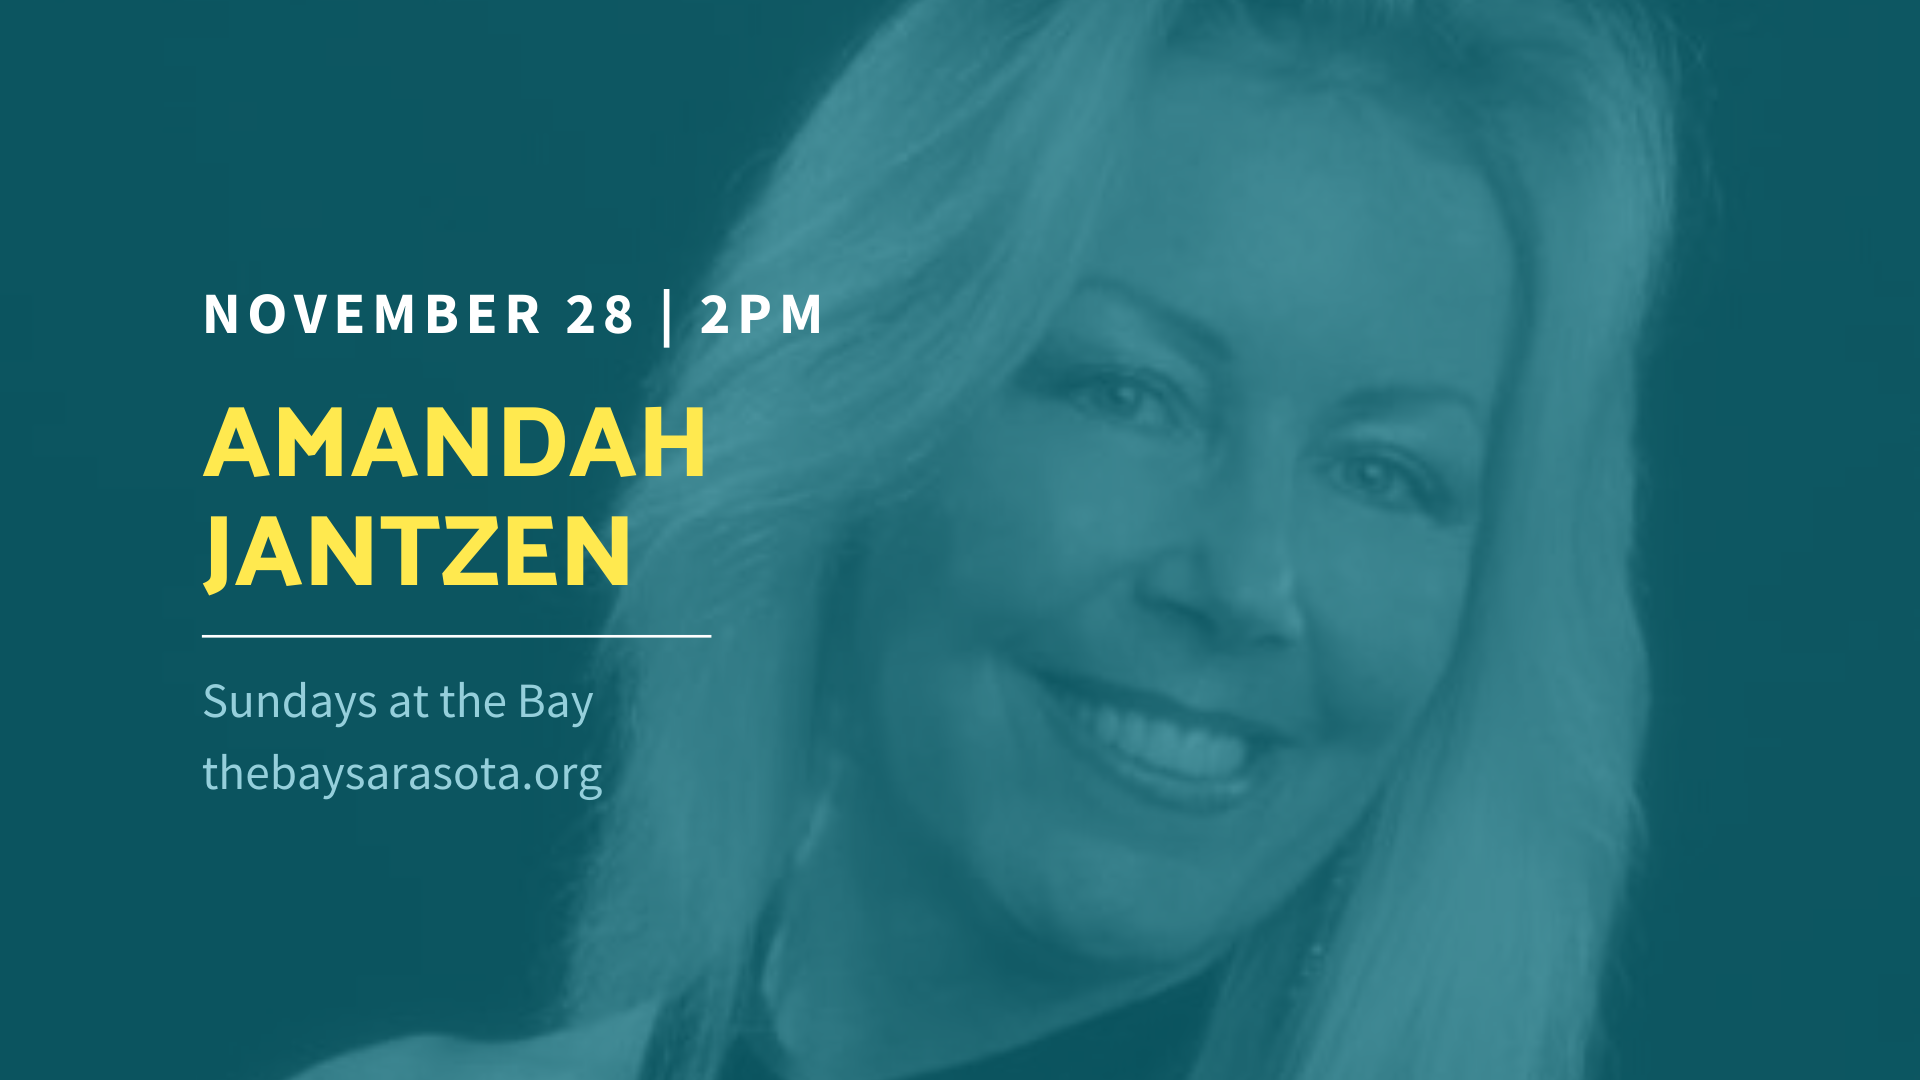 Event information for November 28th Sundays at the Bay event featuring Amandah Jantzen